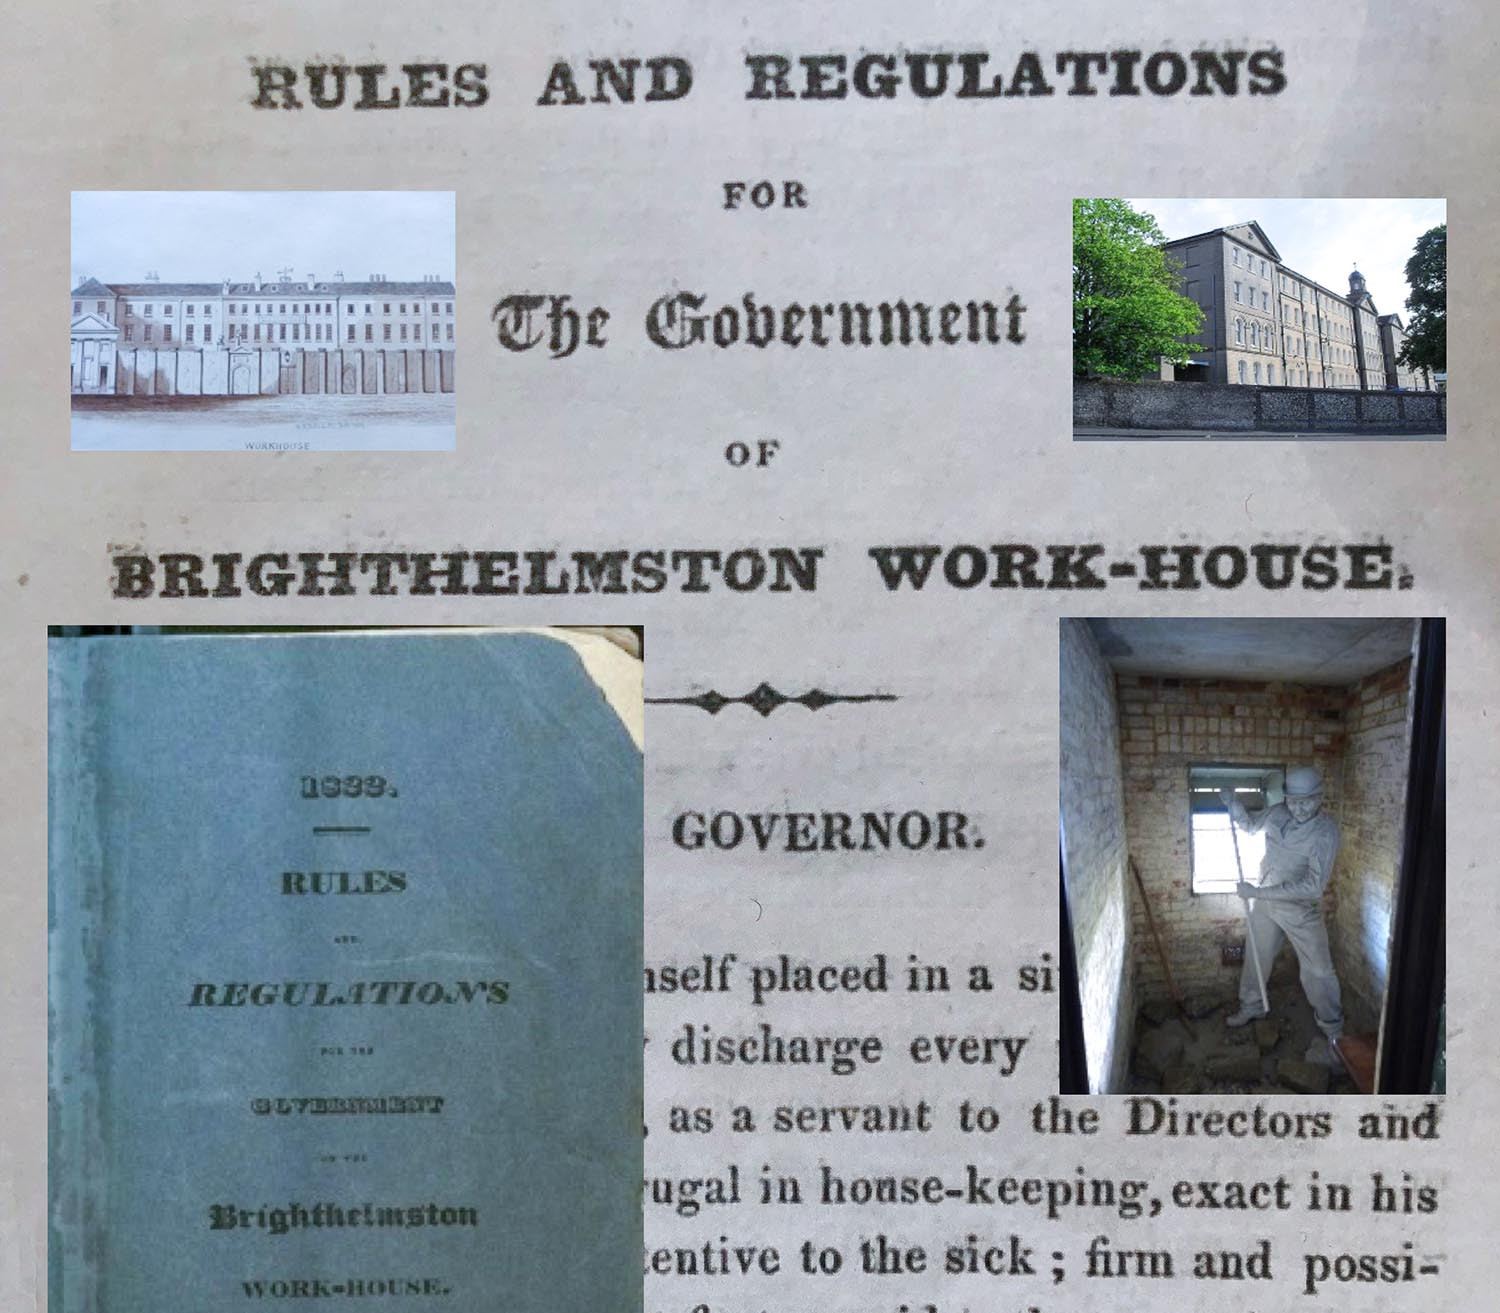 Photo showing the 'Rules and Regulations of the Workhouse', together with other images relating to life in the workhouse